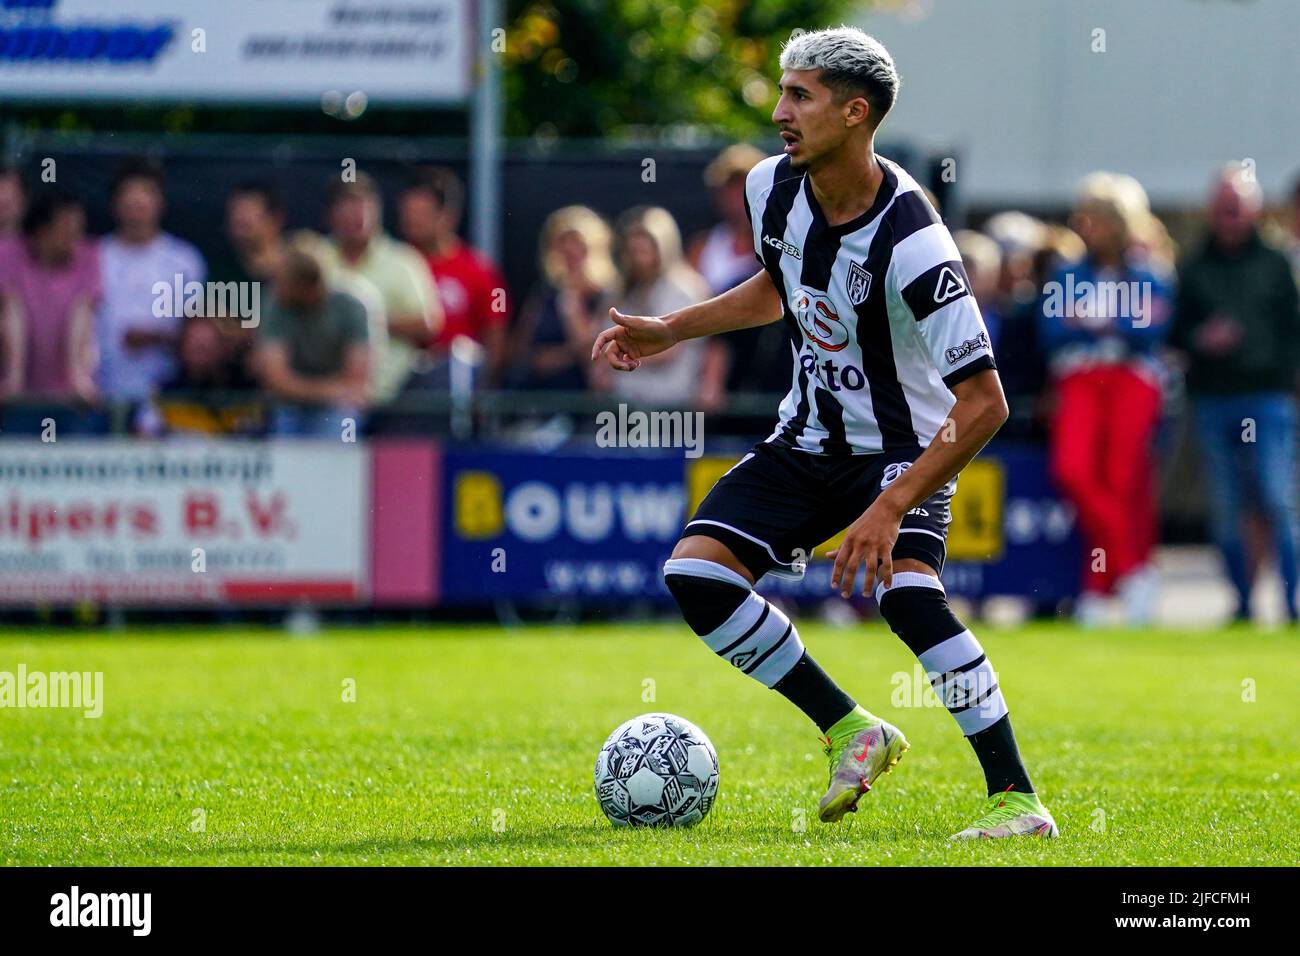 Manderveen, Netherlands. 01st July, 2022. MANDERVEEN, NETHERLANDS - JULY 1: Anas Ouahim of Heracles Almelo during the Friendly match between Regioselectie Manderveen and Heracles Almelo at Sportpark de Samenwerking on July 1, 2022 in Manderveen, Netherlands (Photo by Rene Nijhuis/Orange Pictures) Credit: Orange Pics BV/Alamy Live News Stock Photo